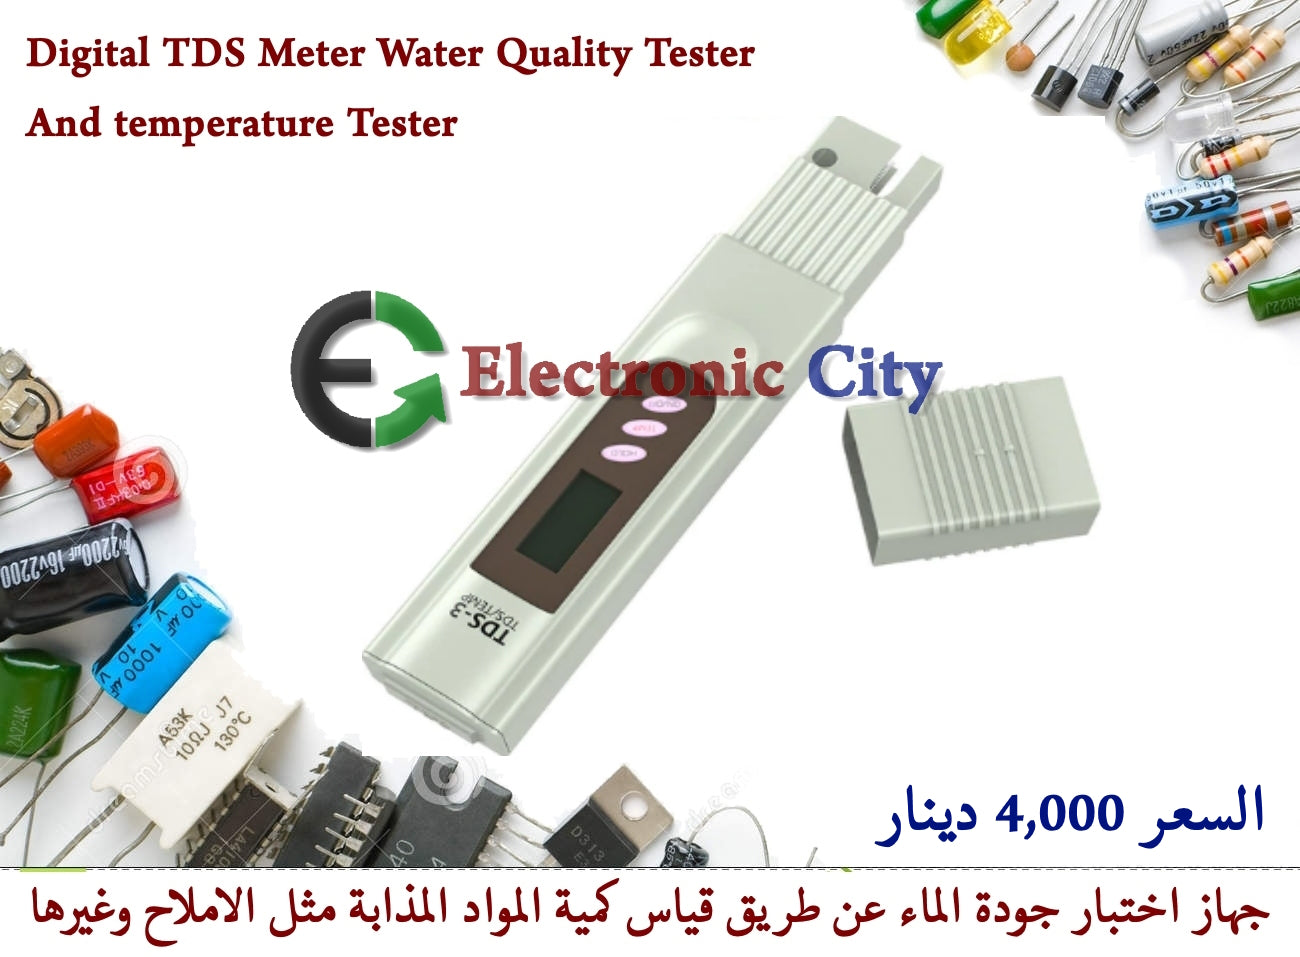 Digital TDS Meter Water Quality Tester and temperature Tester #L4 050754